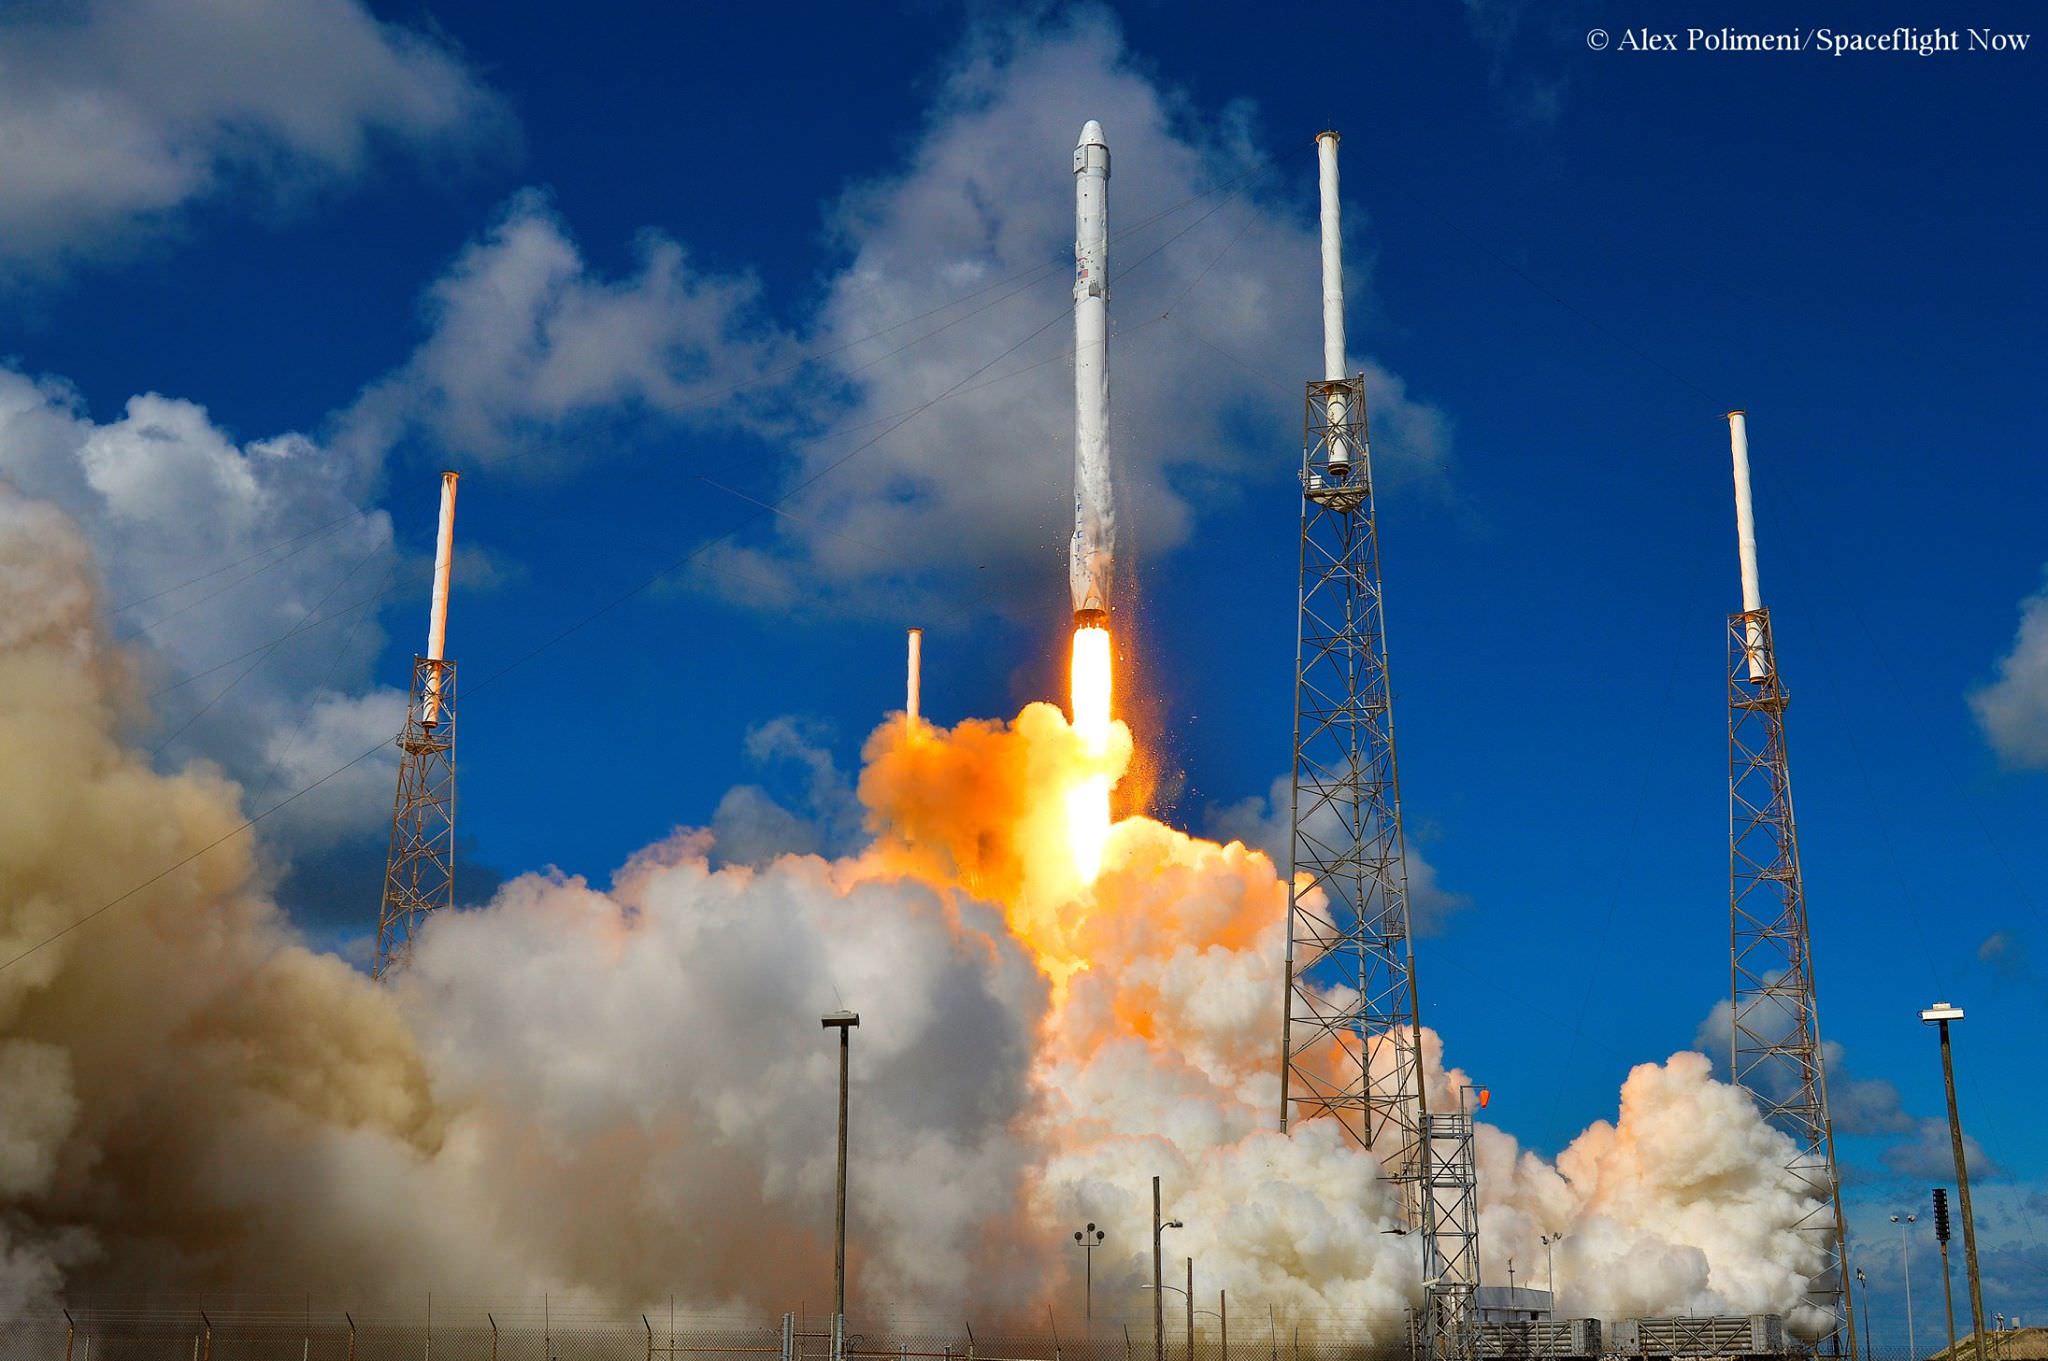 SpaceX Falcon 9 rocket launch from Cape Canaveral, Florida, on June 28, 2015. Credit: Alex Polimeni